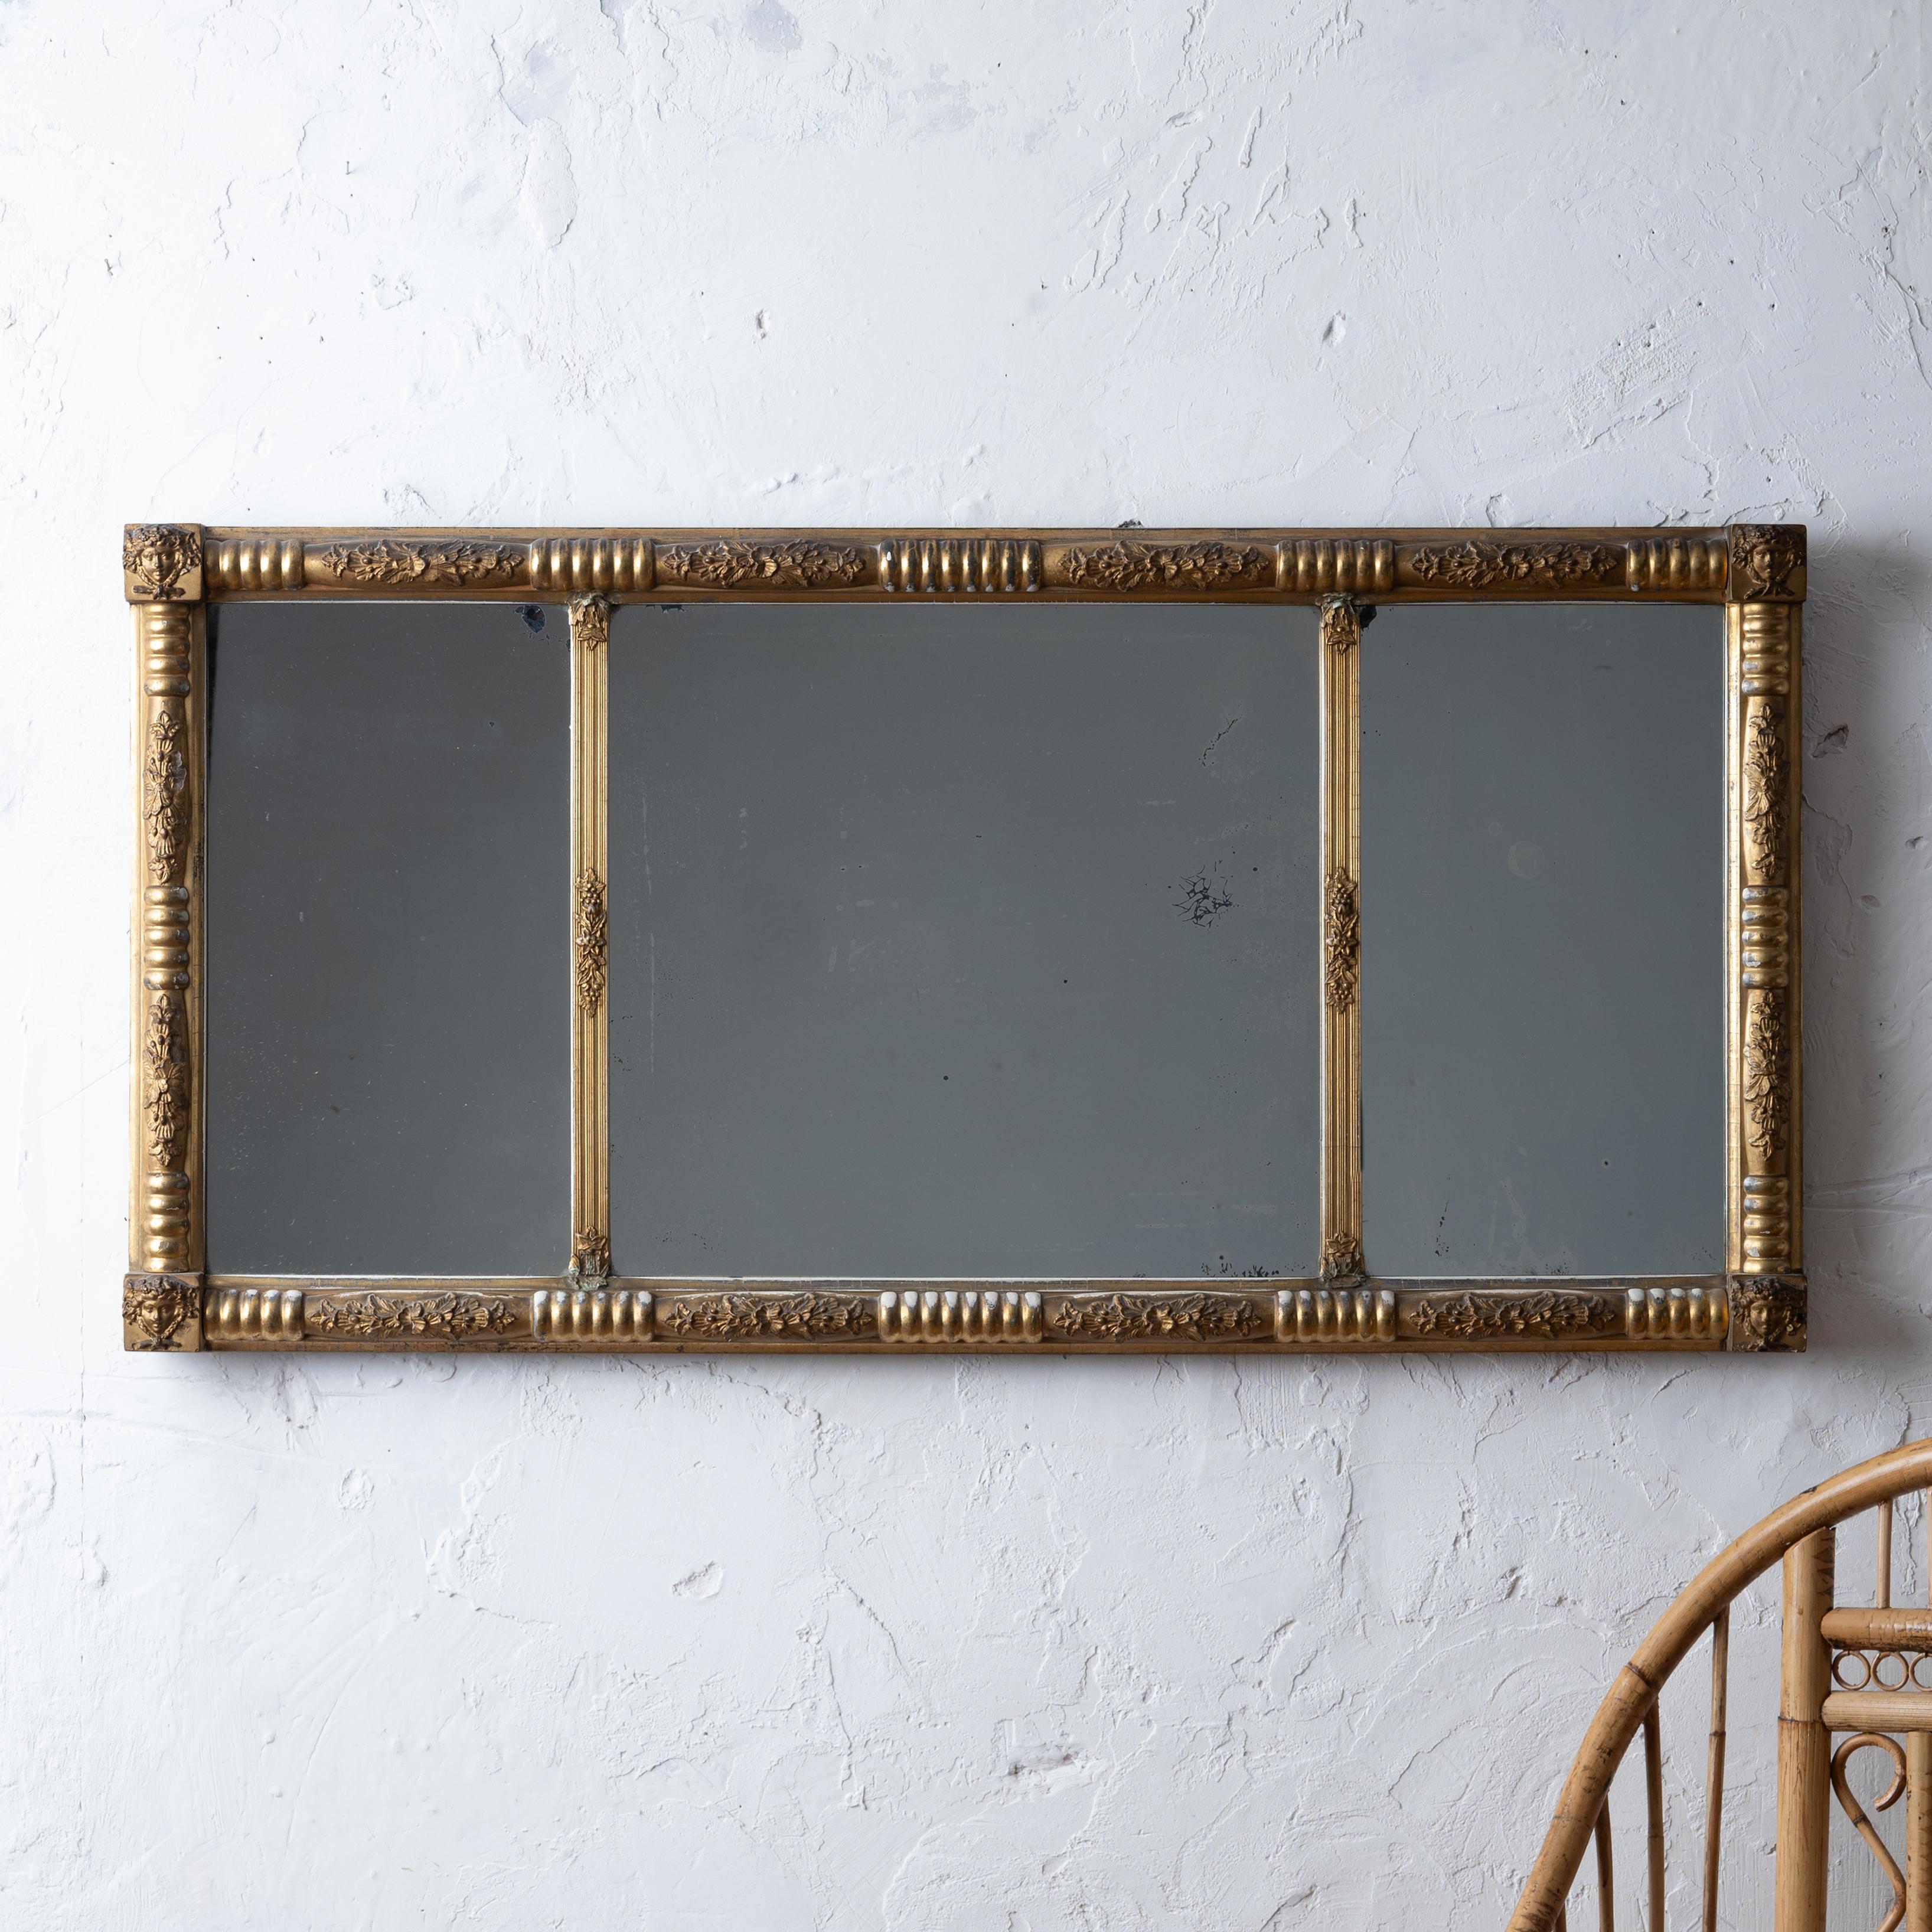 A gilt overmantel mirror, mid-19th century.
Featuring a split baluster frame with figural bacchante corner blocks and divided mirror plate.

43 ½ by 21 ½ inches


